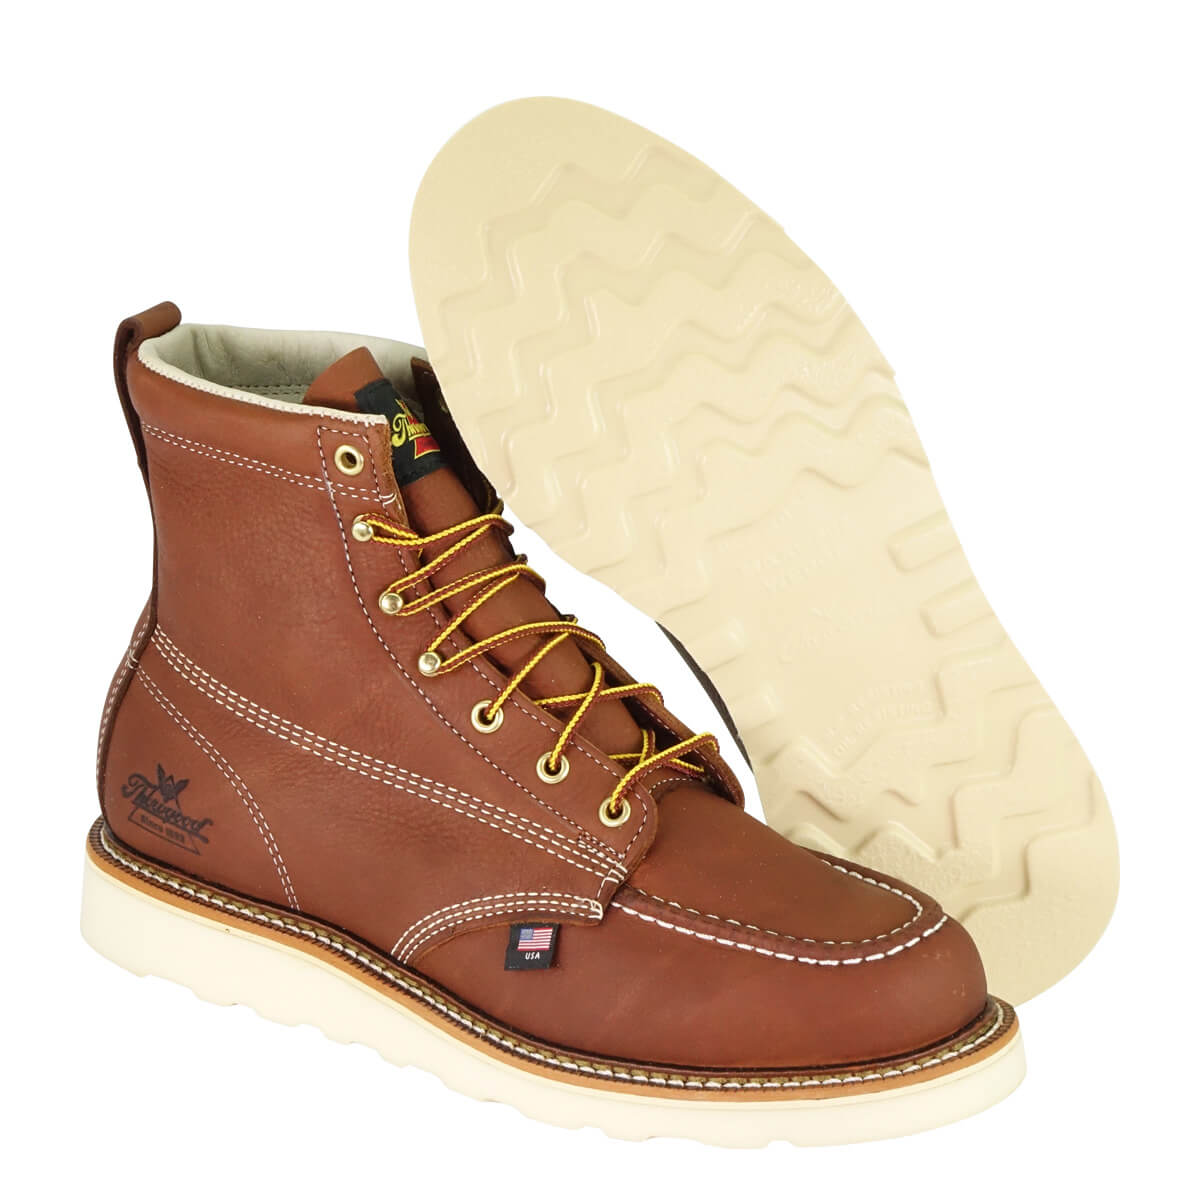 814-4200 6 inch  TOBACCO Moccassin TOE Wedge Outsole Work Boot (Tobacco Brown)